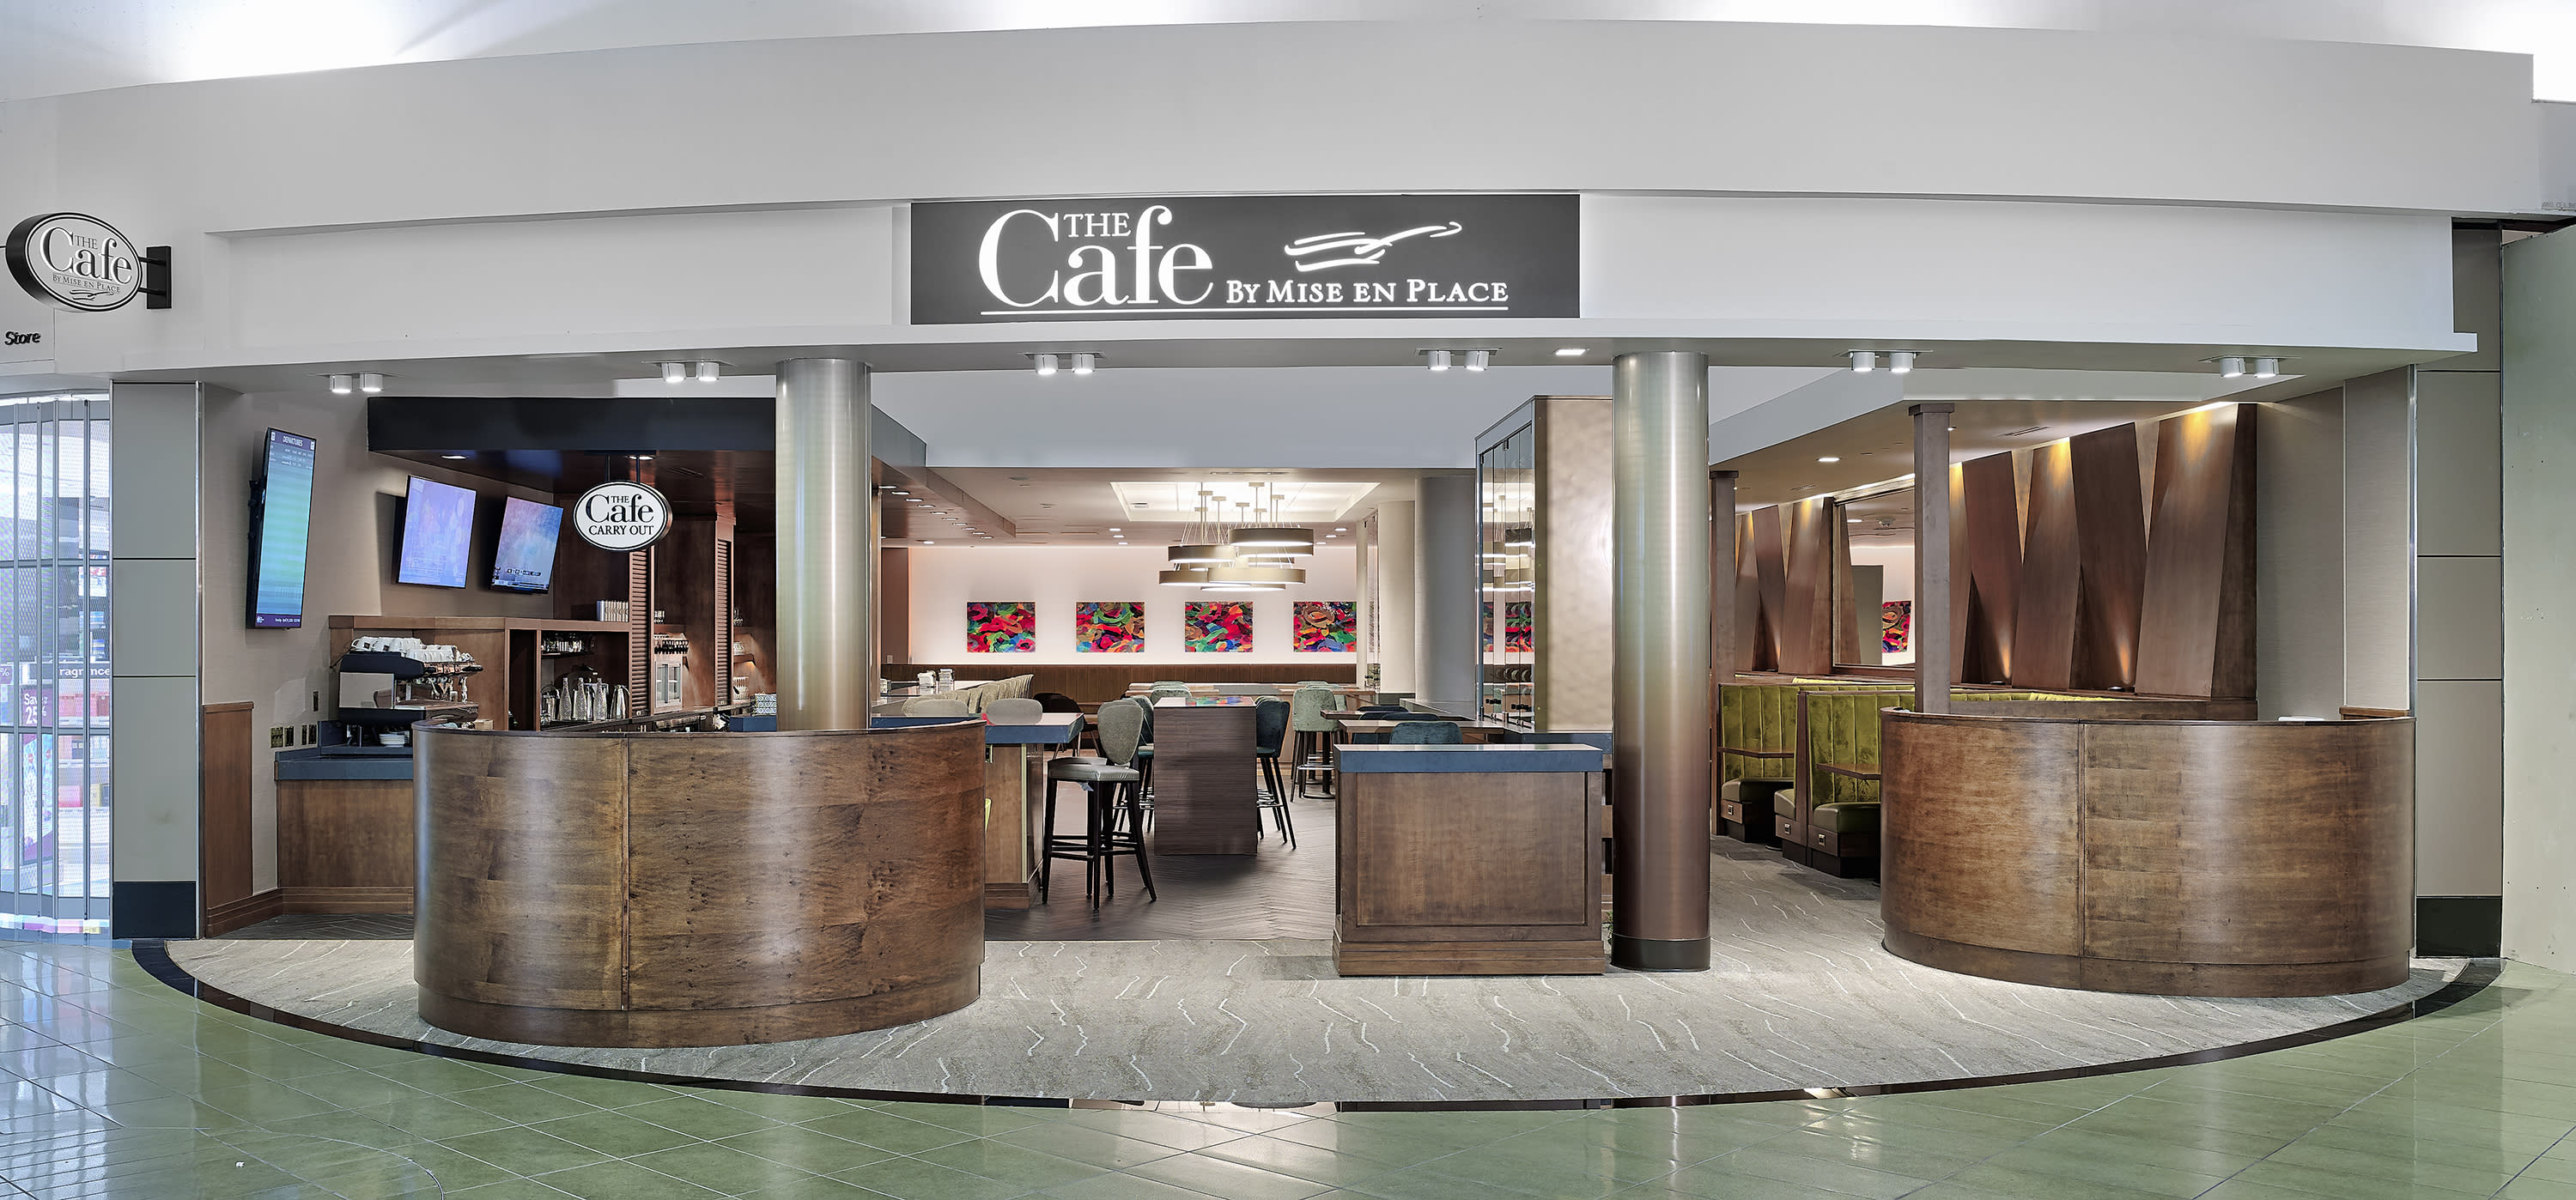 The Cafe  by Mise en Place Tampa Airport  Airside F